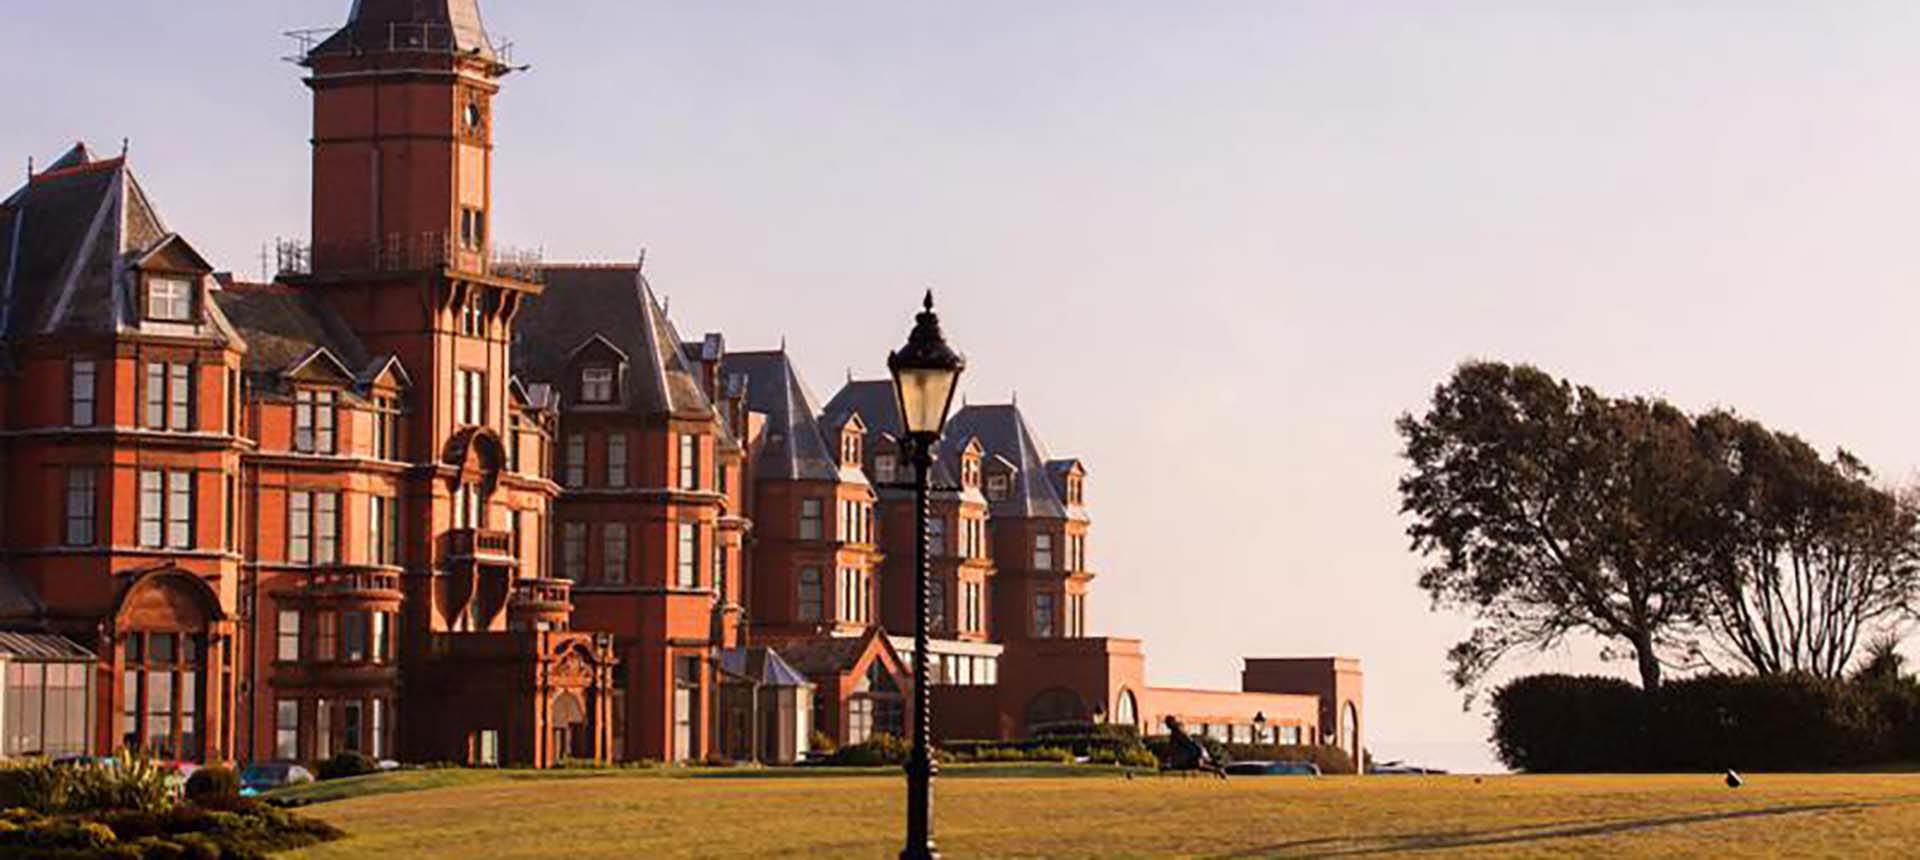 Exterior of the Slieve Donard Hotel in Newcastle, Northern Ireland